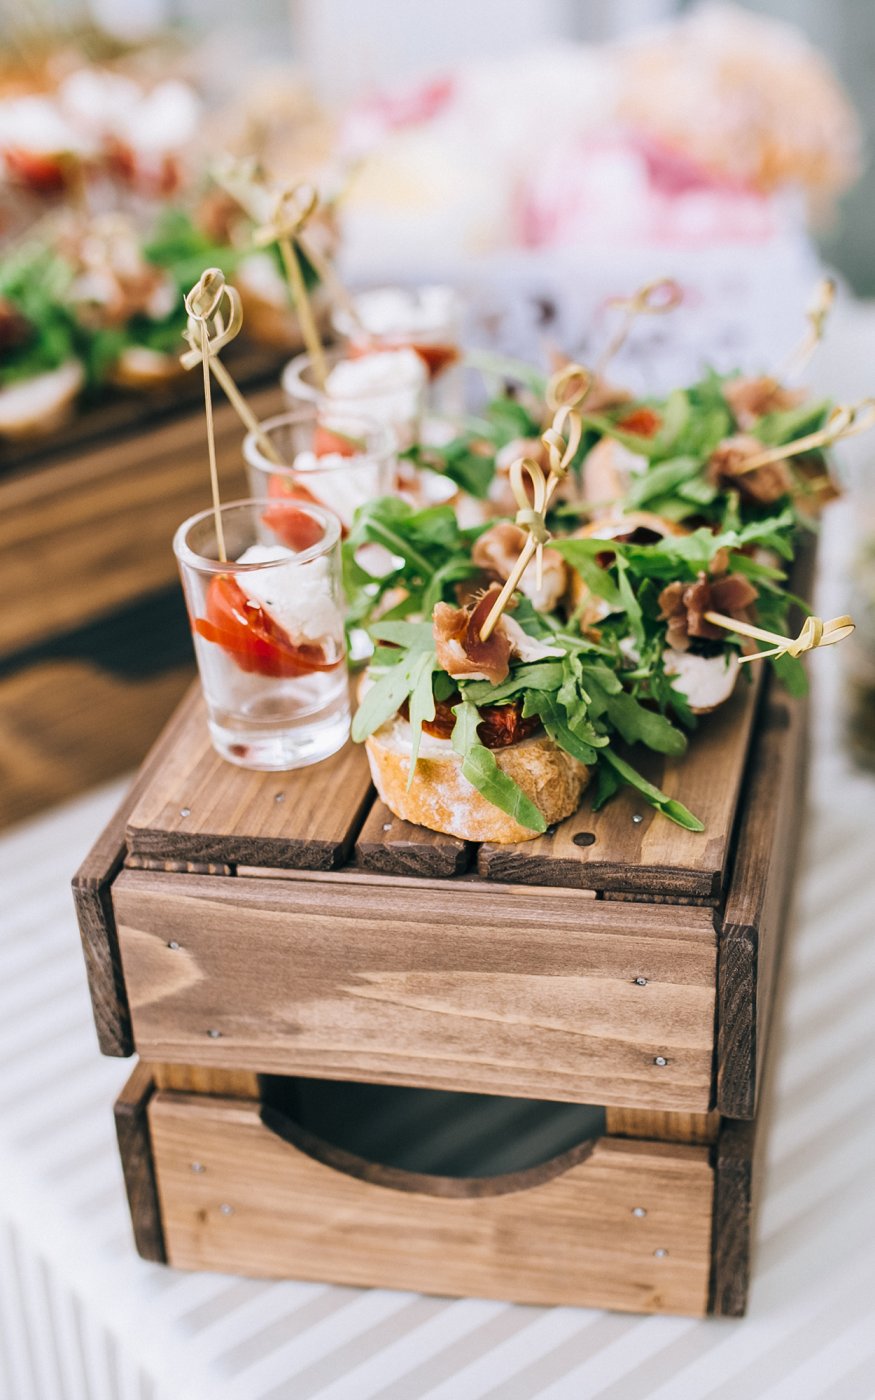 A rustic crate acting as a tray for a selection of gourmet finger food including rocket and chicken skewers